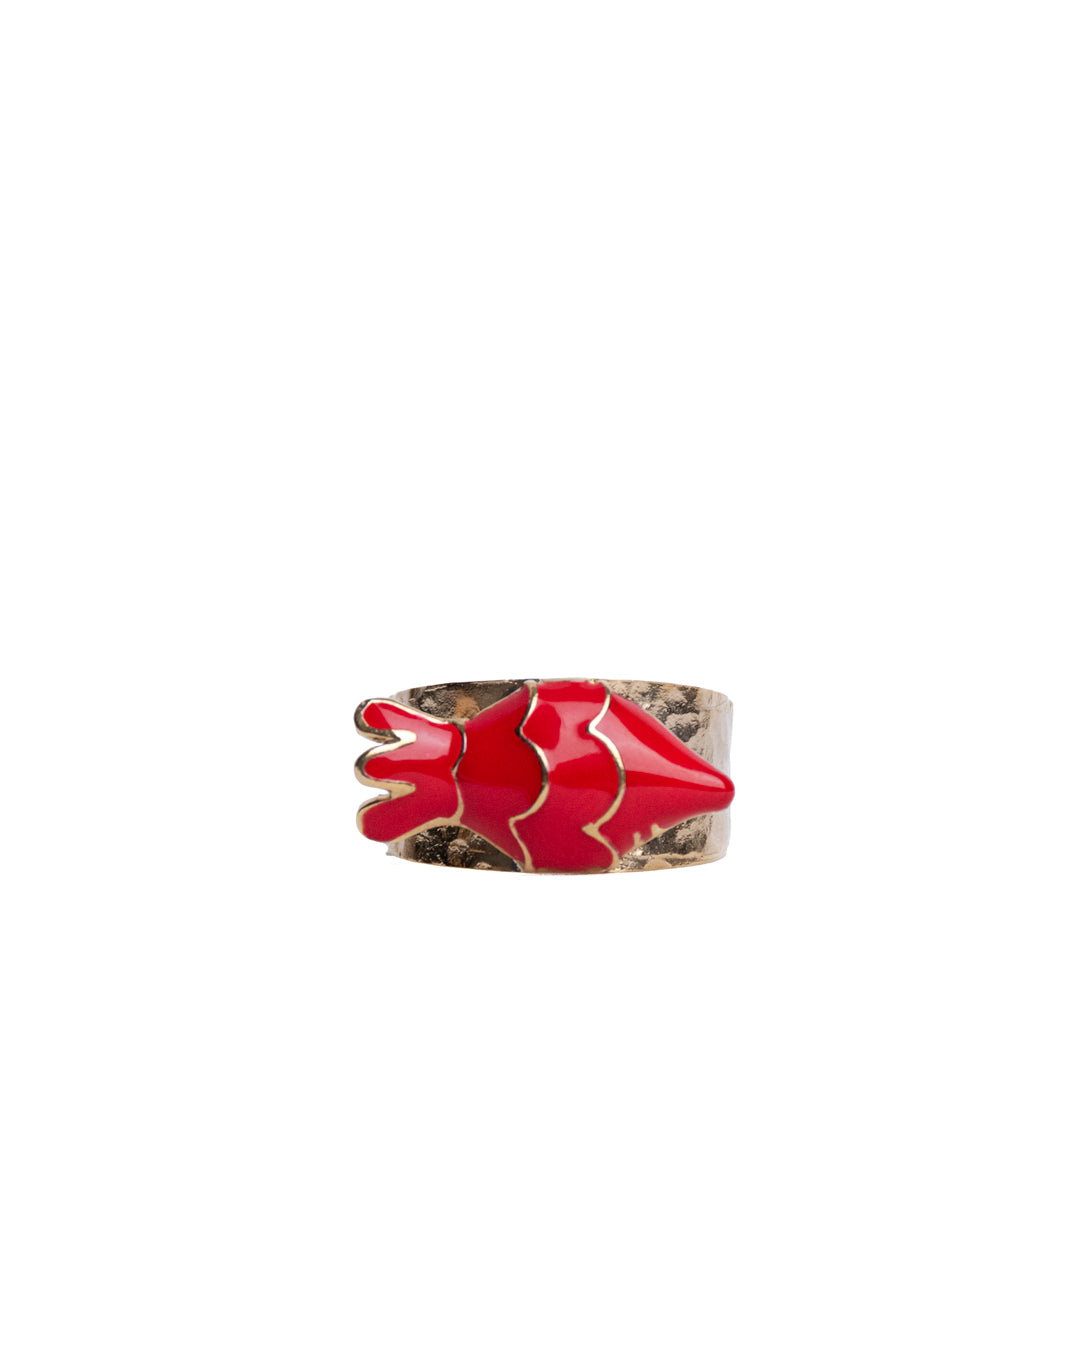 Gino Fish Ring Gold Handmade handcrafted jewelry fun colorful